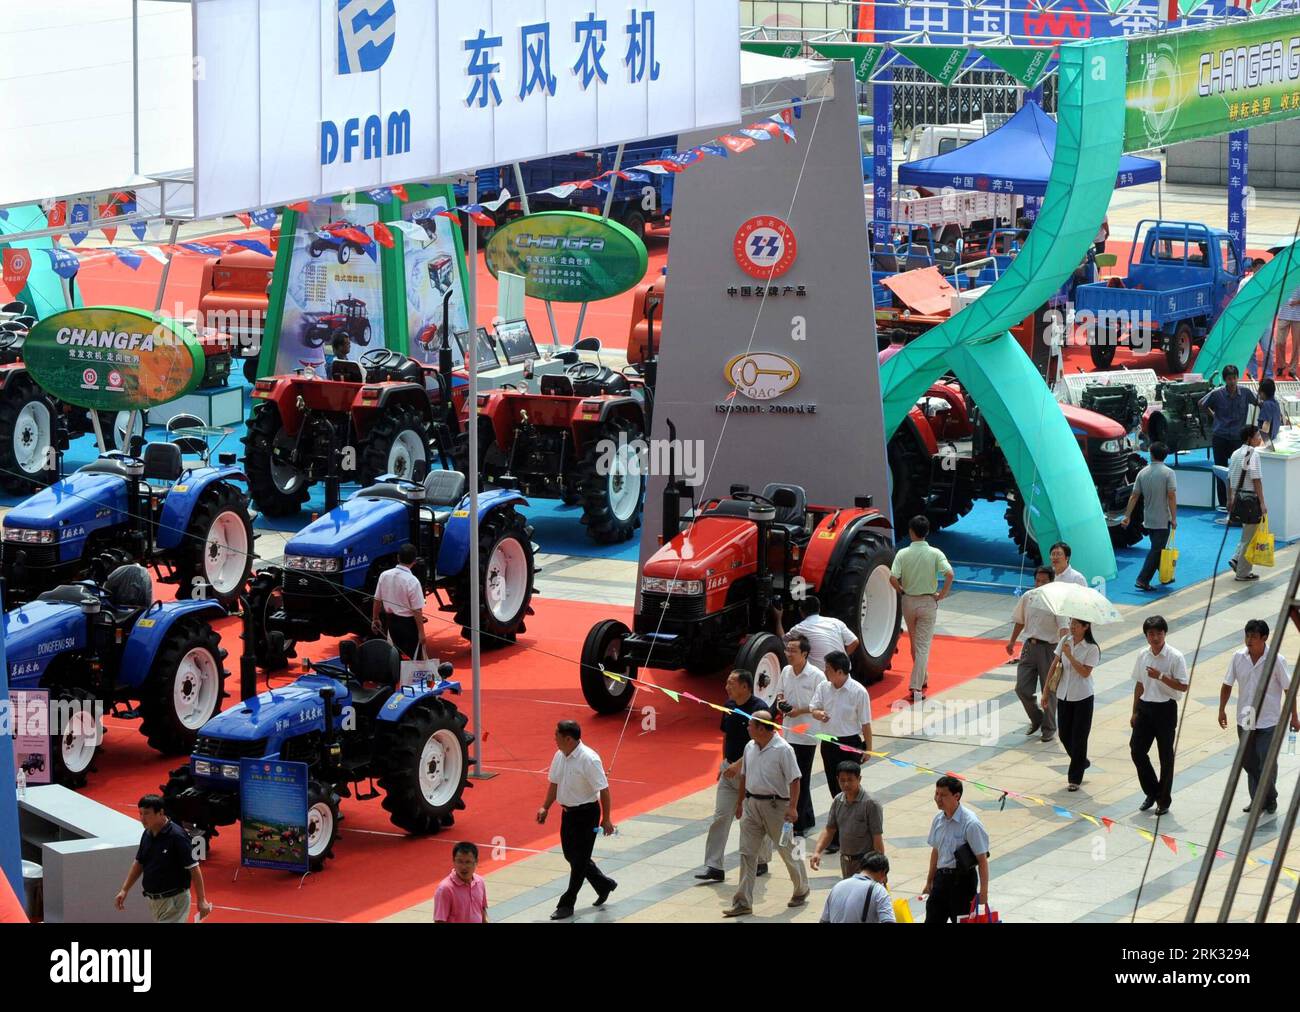 Bildnummer: 53296797  Datum: 27.08.2009  Copyright: imago/Xinhua (090827) -- NANJING, Aug. 27, 2009 (Xinhua) -- visit China Agricultural Equipment Expo 2009 in Nanjing, capital of east China s Jiangsu Province, Aug. 27, 2009. The 3-day exposition opened on Thursday with participation of more than 300 companies and institutes all over China. (Xinhua/Sun Can) (1)CHINA-NANJING-AGRICULTURAL EQUIPMENT EXPO(CN) PUBLICATIONxNOTxINxCHN Wirtschaft Messe kbdig xcb 2009 quer  o0 Landwirtschaft, Landwirtschaftsmesse, Traktoren    Bildnummer 53296797 Date 27 08 2009 Copyright Imago XINHUA  Nanjing Aug 27 2 Stock Photo